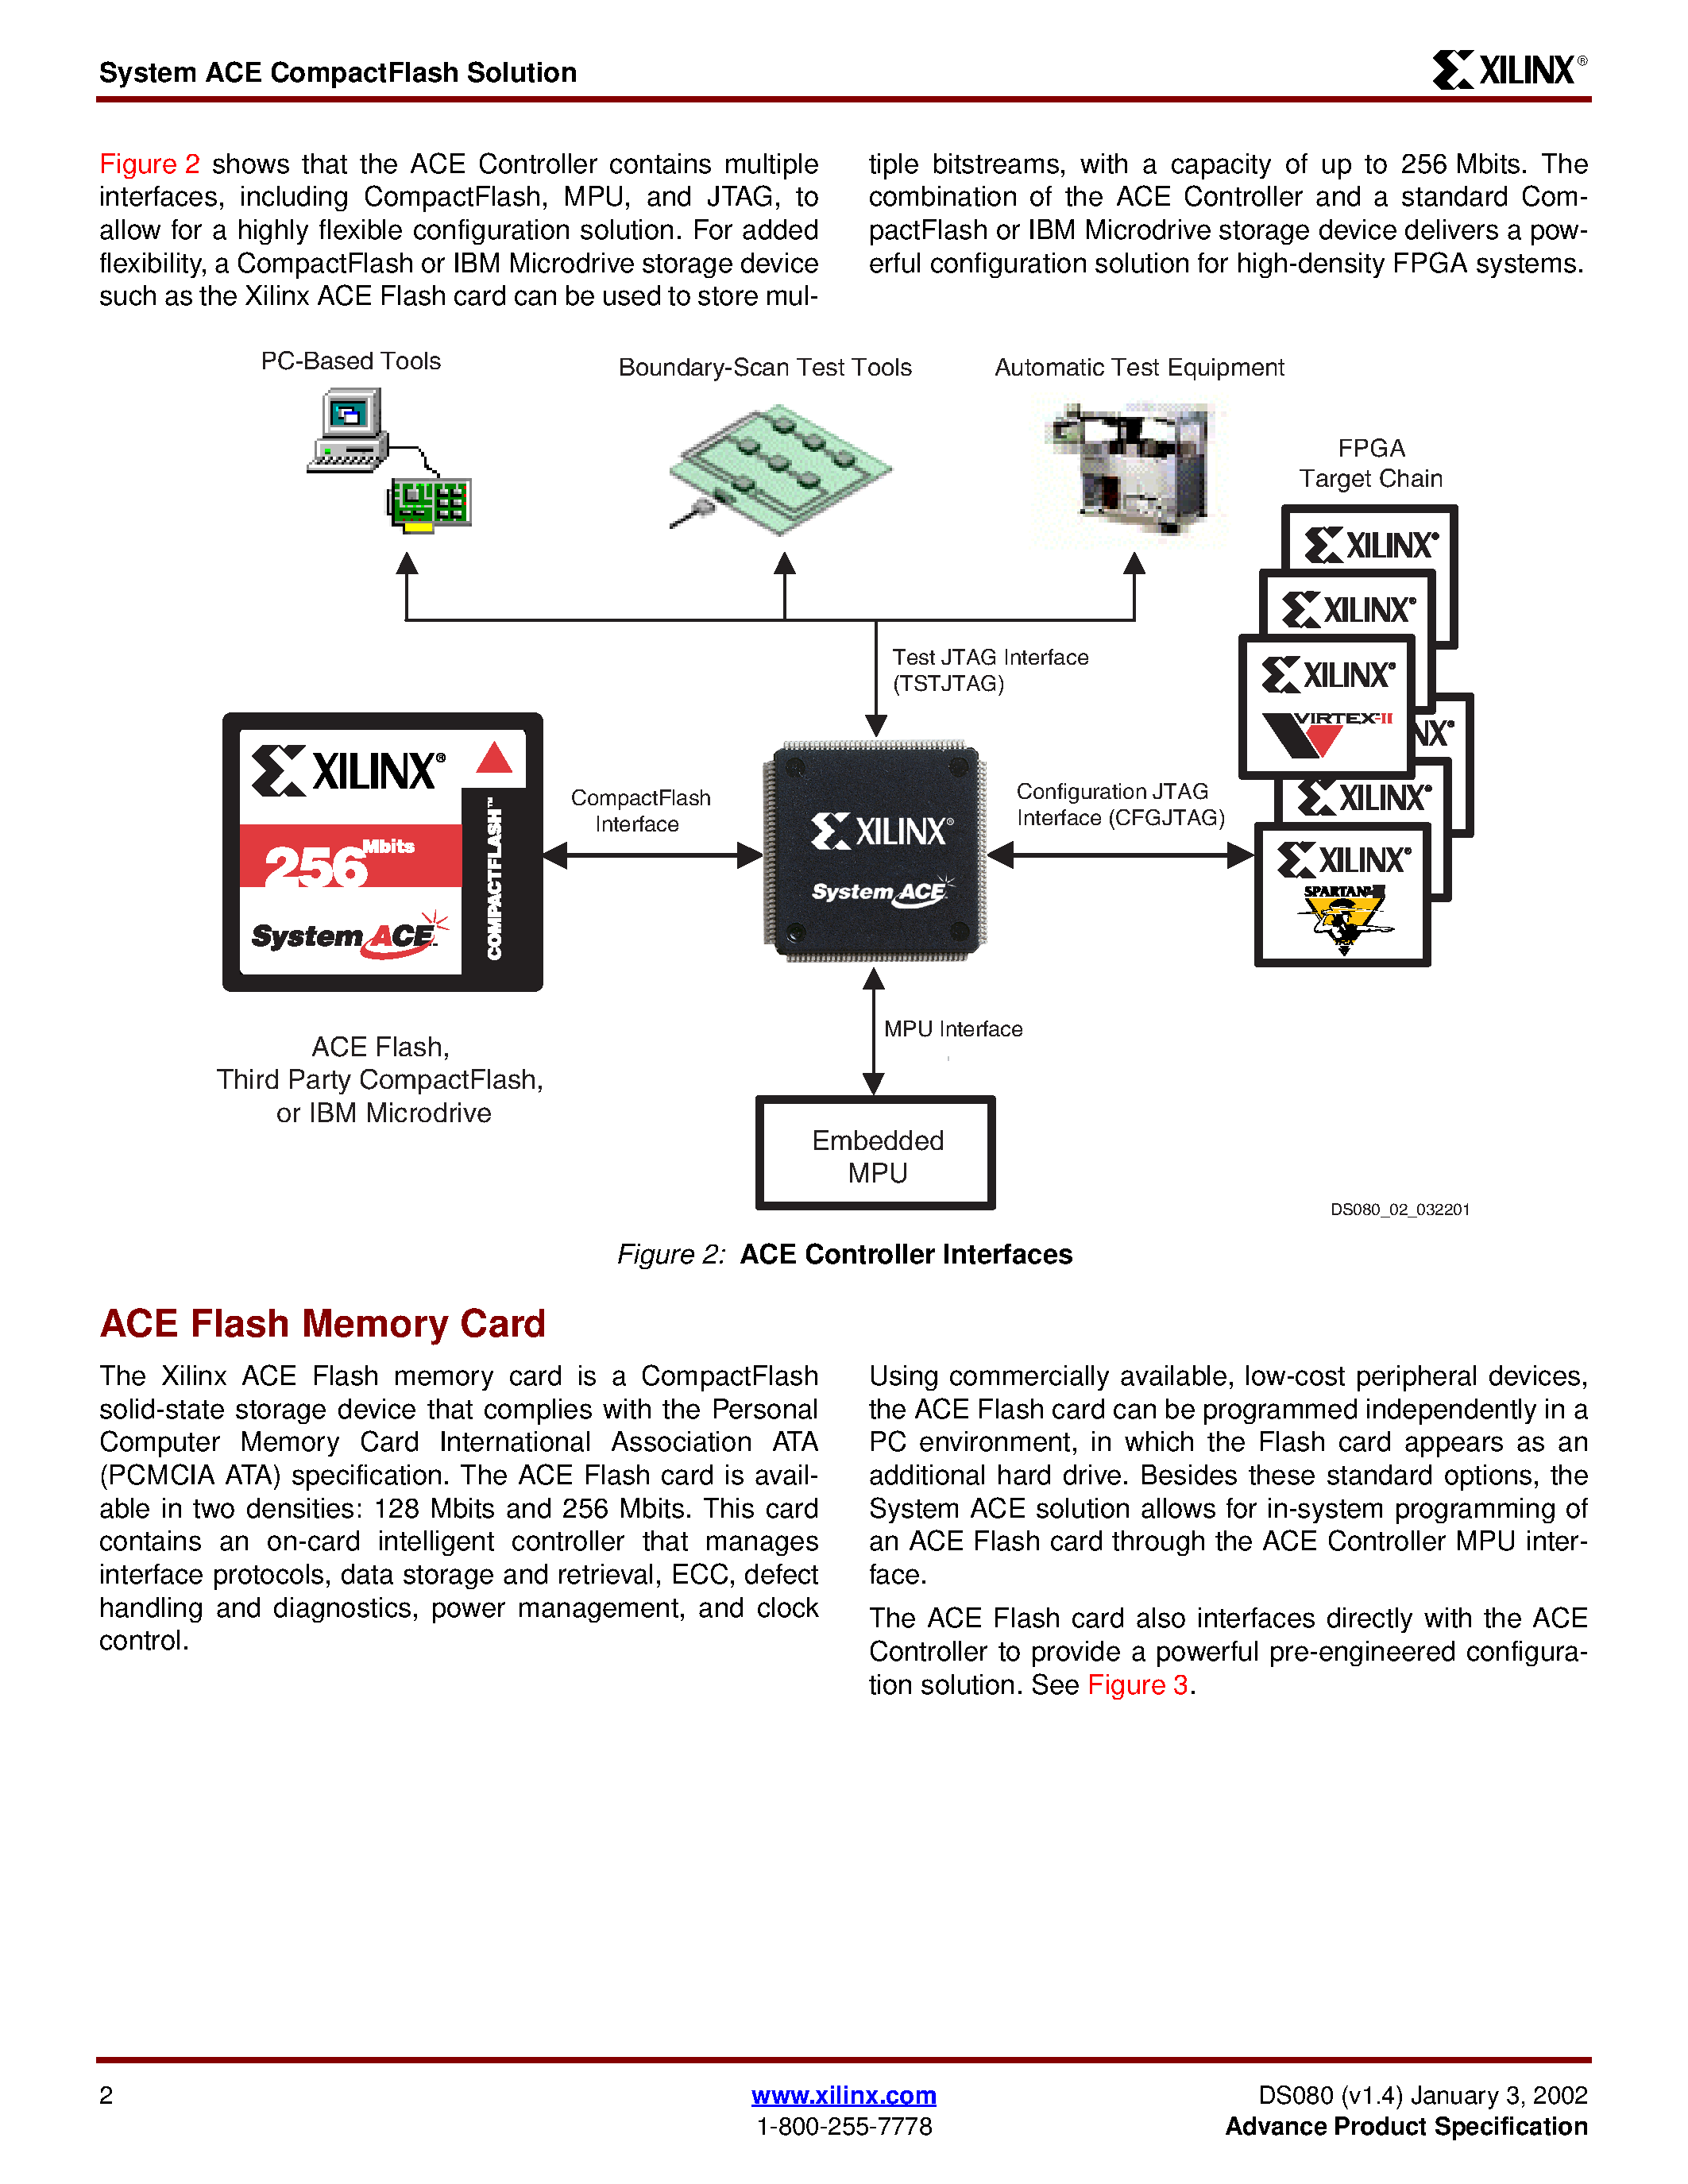 Даташит XCCACE256-I - System ACE CompactFlash Solution страница 2